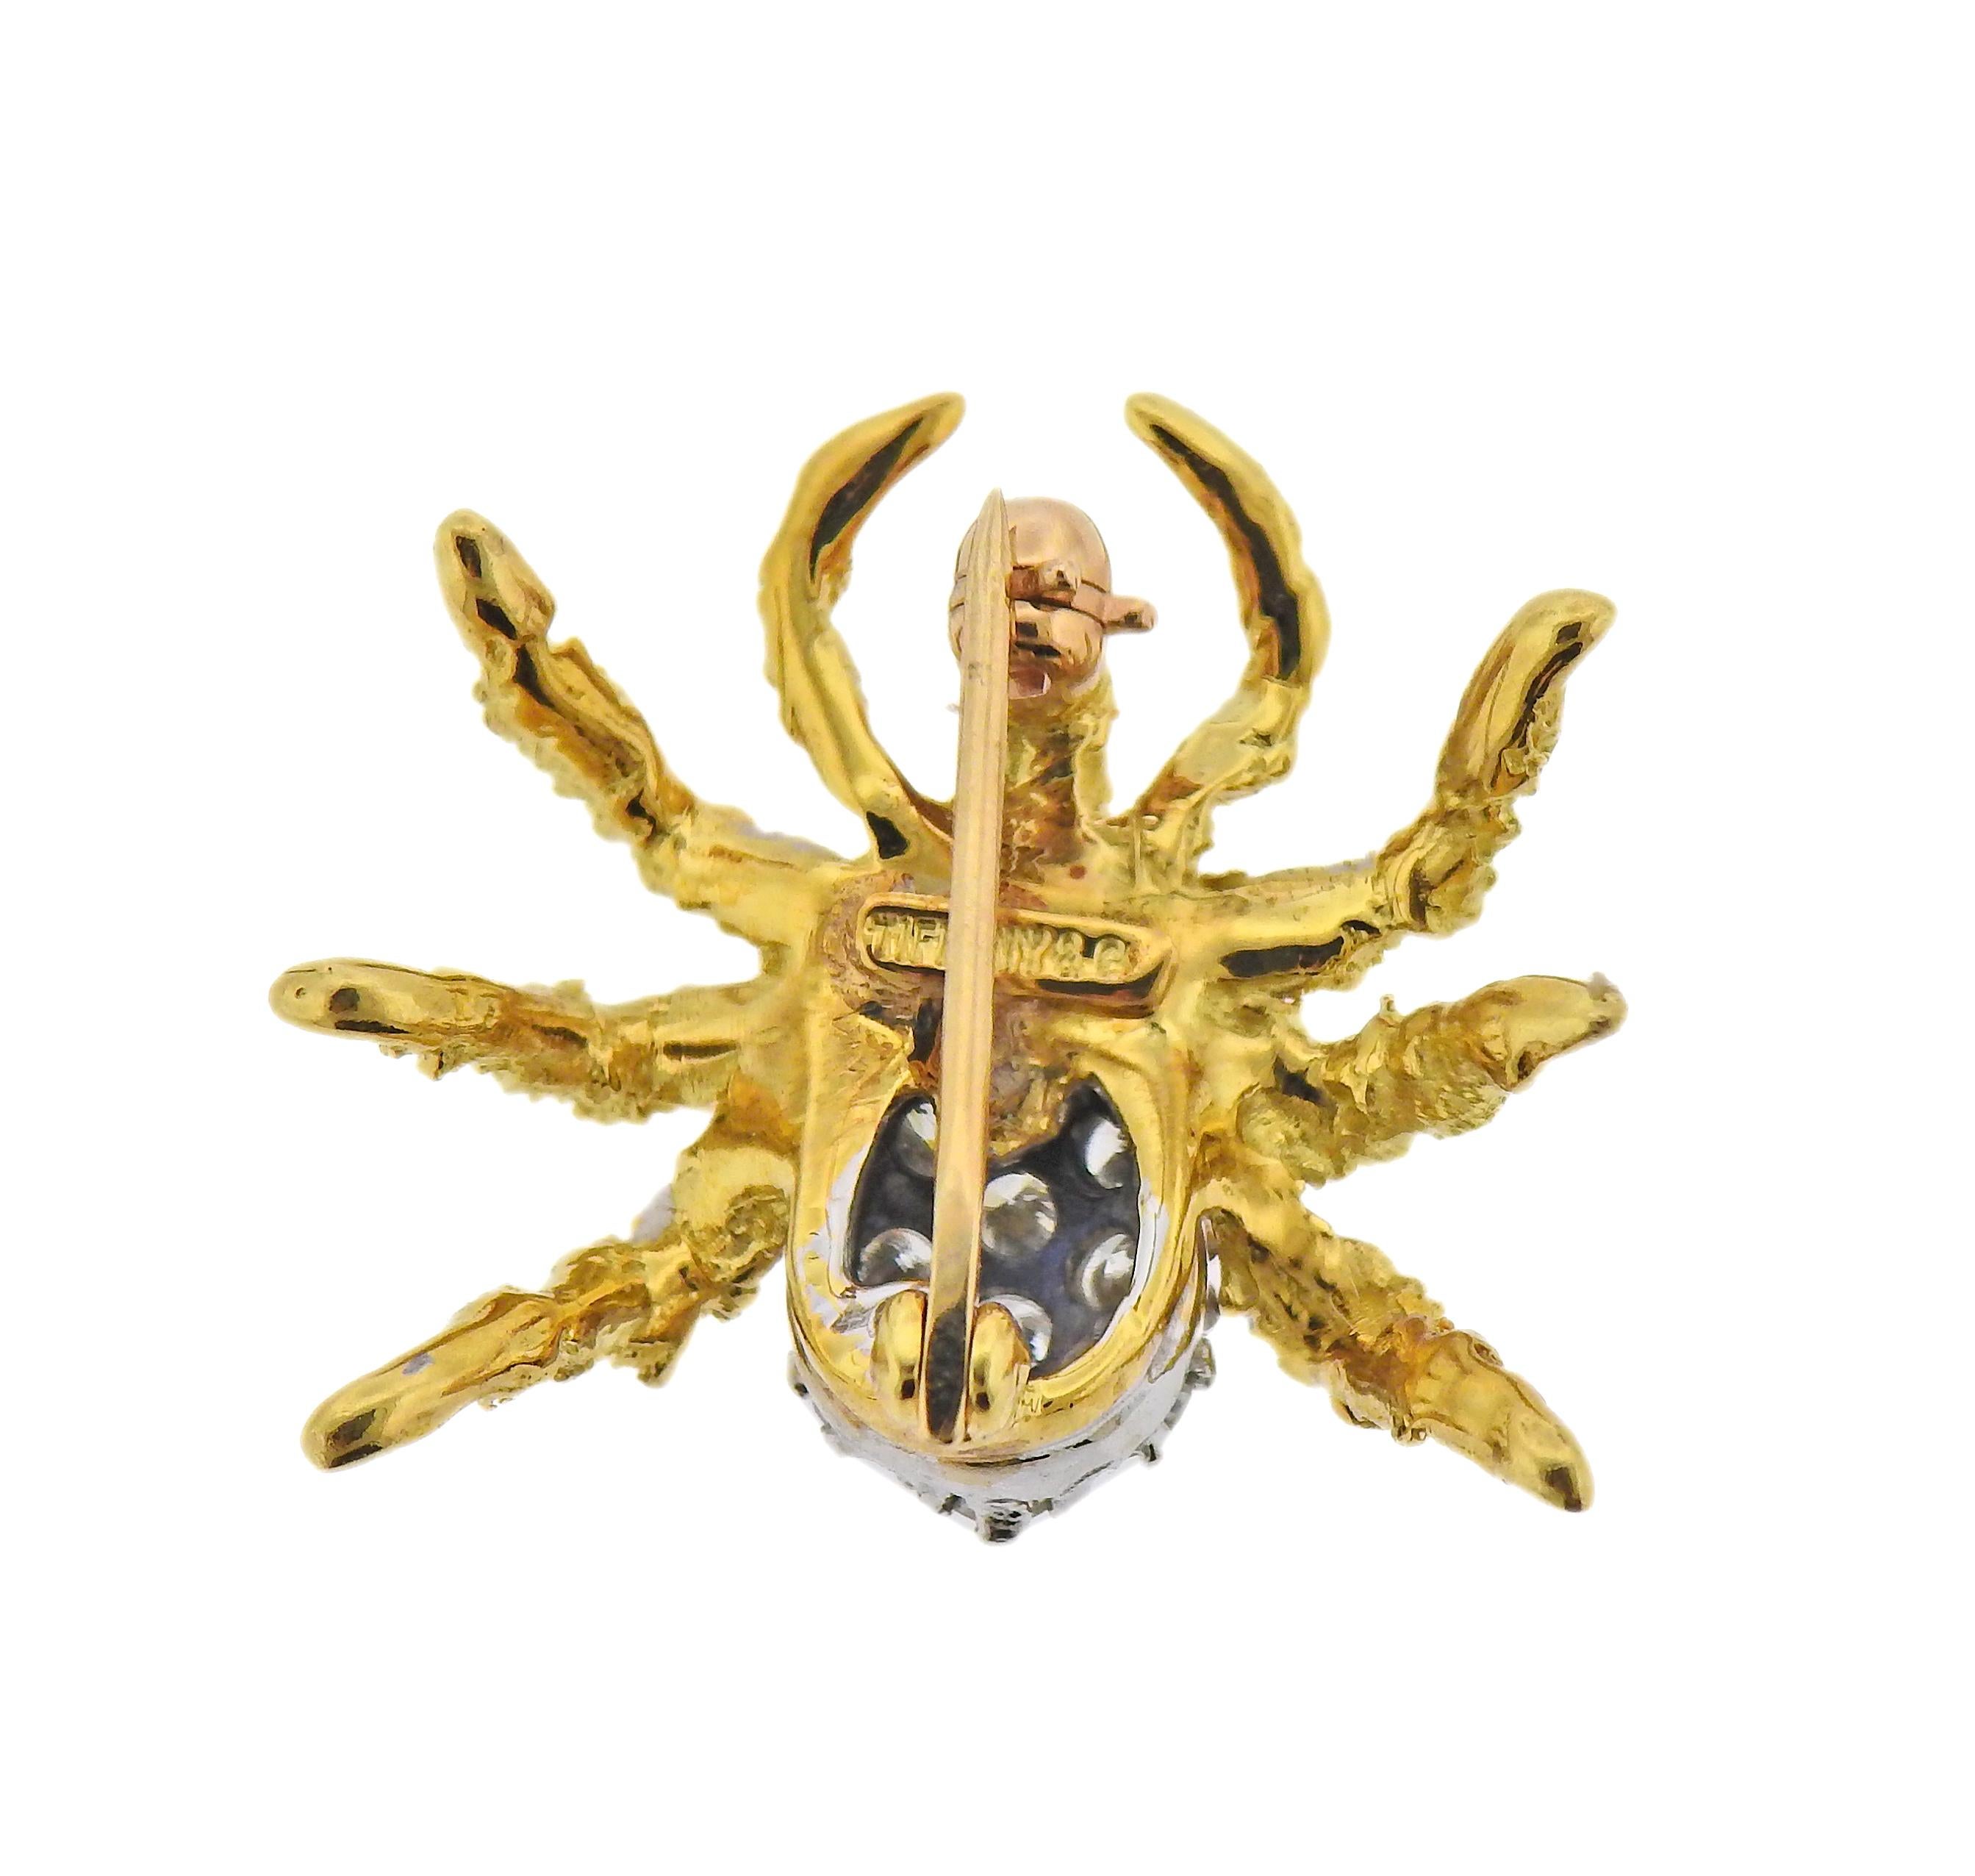 Tiffany & Co 18k gold spider brooch, with approx. 0.50cts in G/VS diamonds. Brooch is 23mm x 25mm.  Weight - 5.36 grams. Marked: Tiffany & Co, 750.